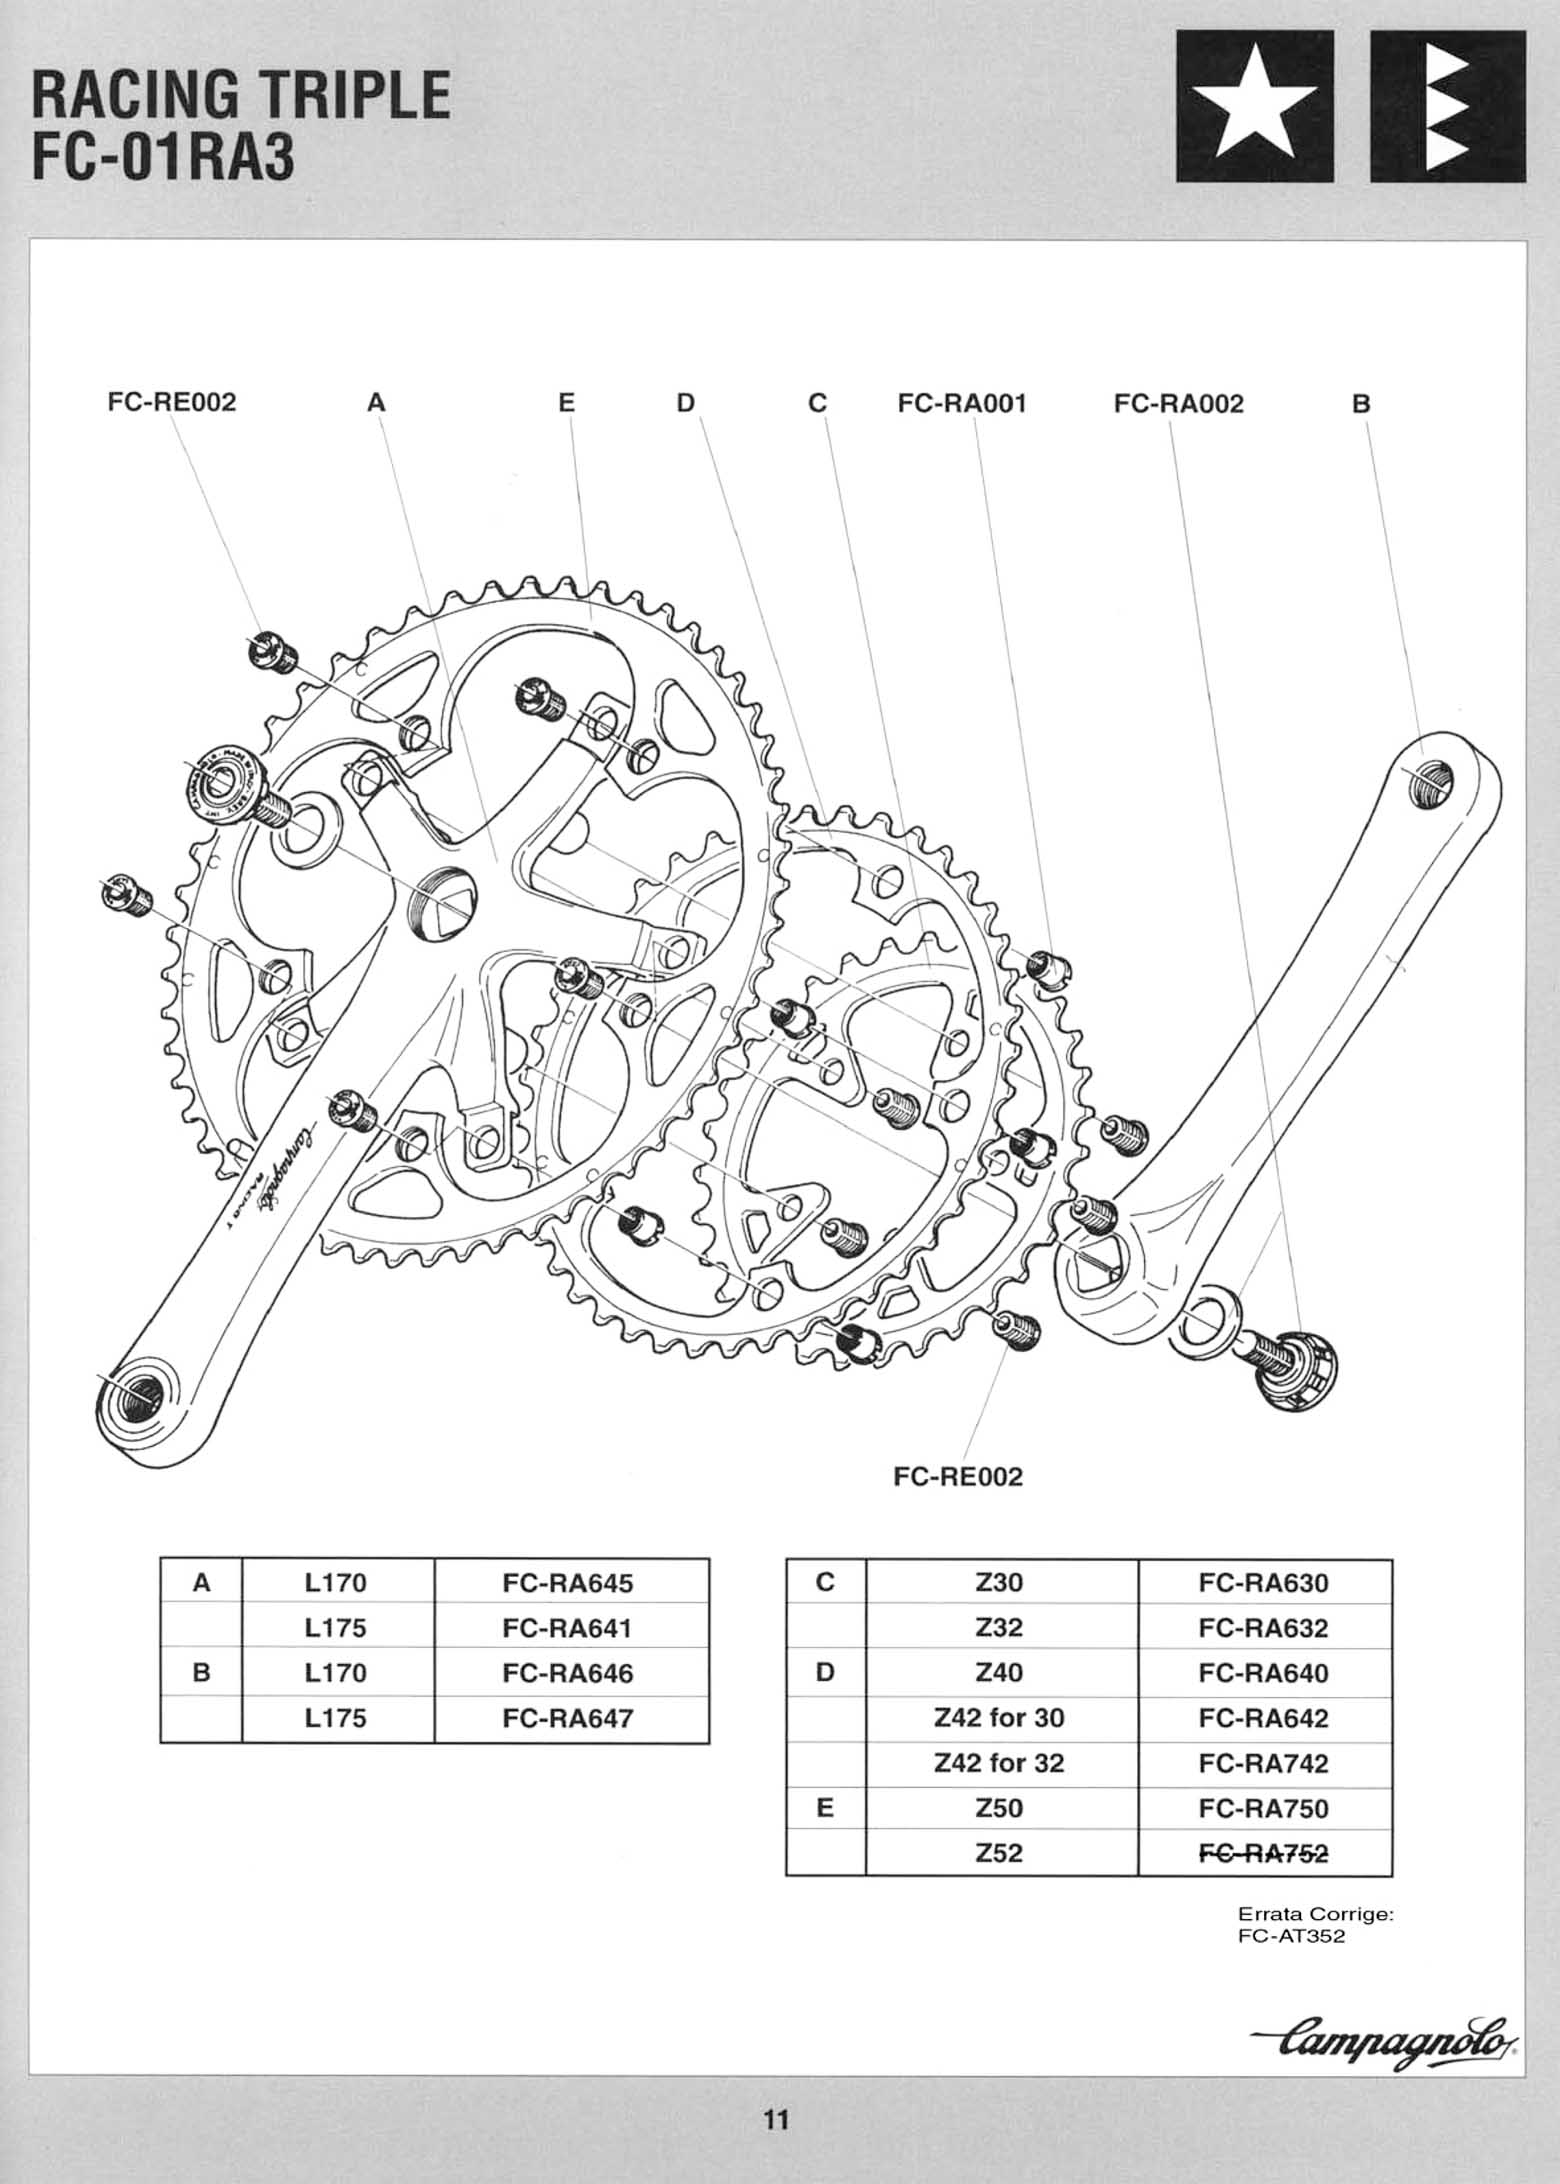 Campagnolo Spare Parts Catalogue - 1995 Product Range page 11 main image